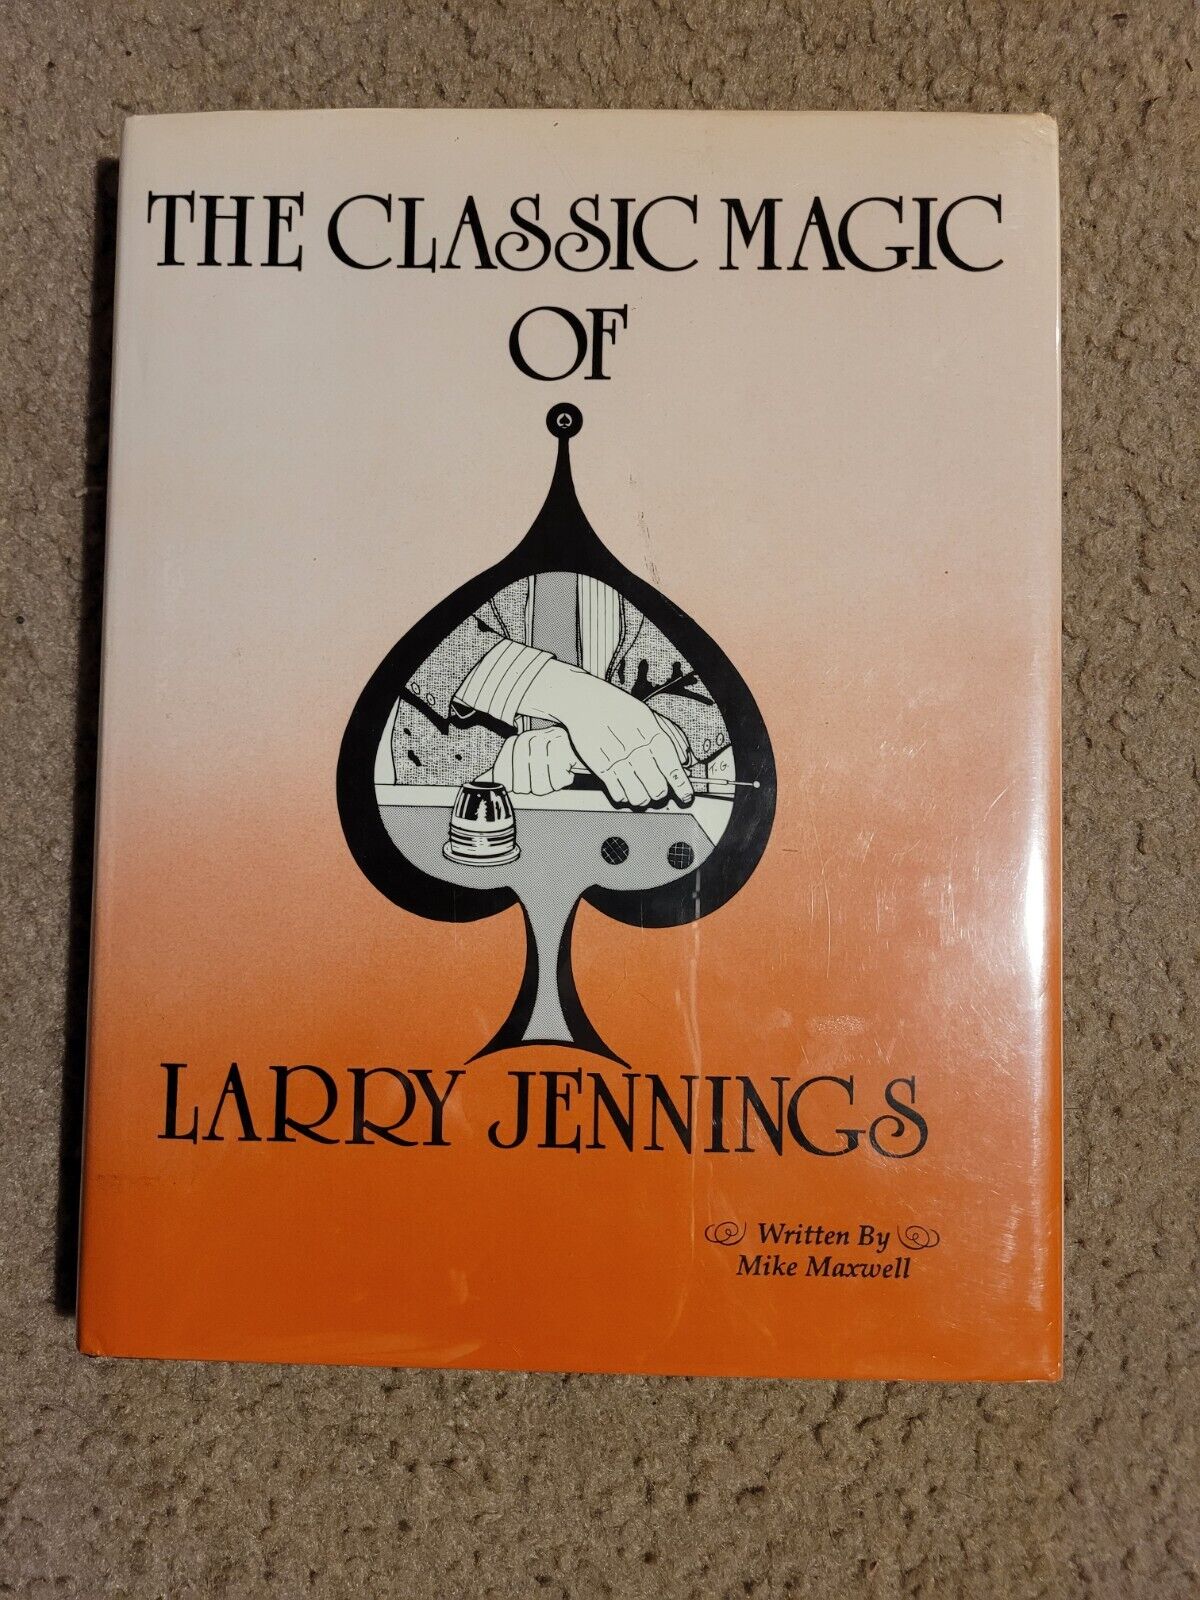 The Classic Magic Of Larry Jennings by Mike Maxwell